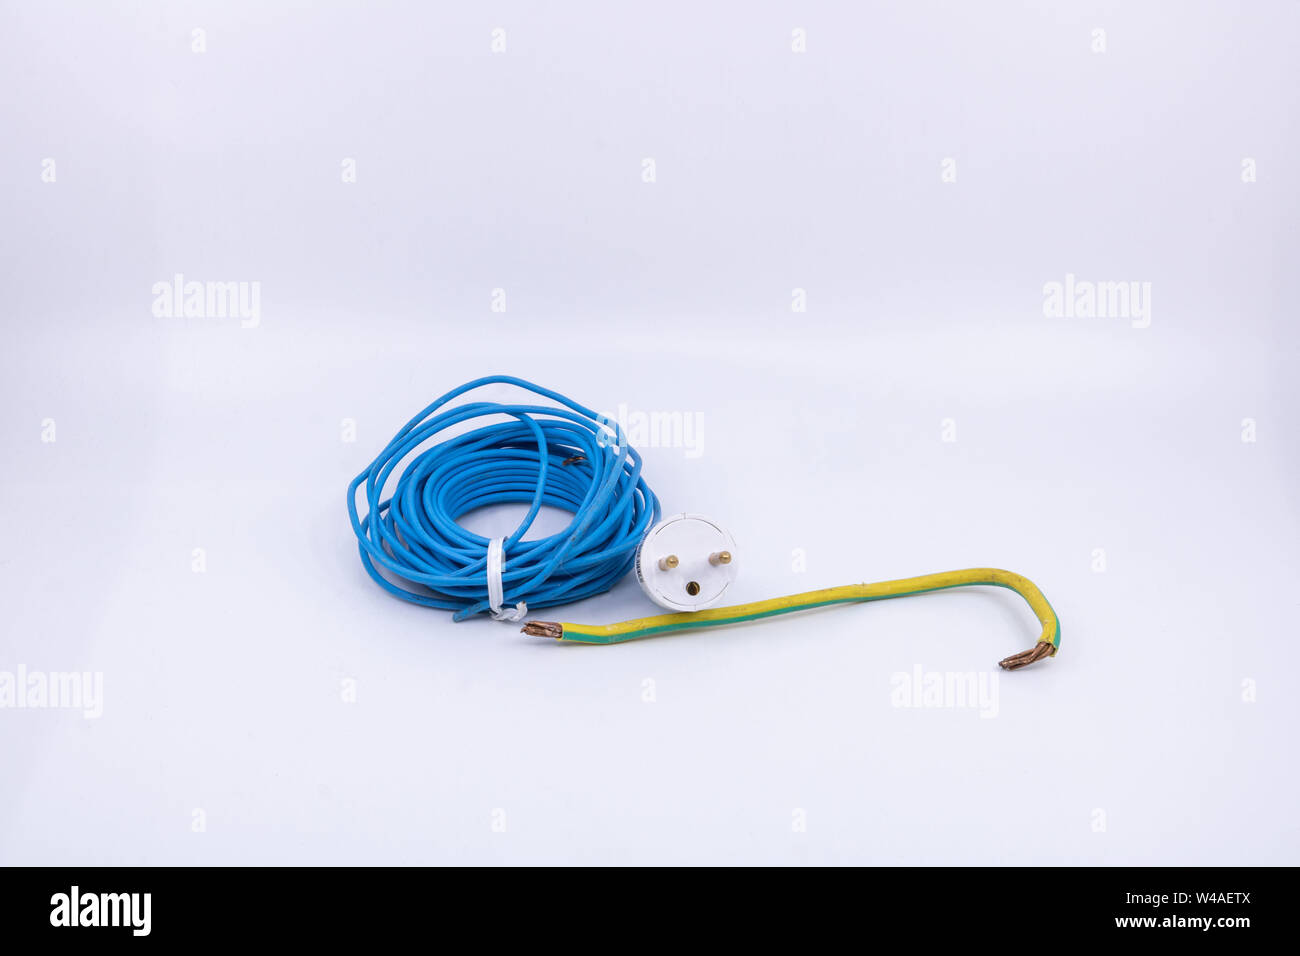 Graphic resource for electrician, electromechanic, isolated objects electric wires and electric plug on white background Stock Photo